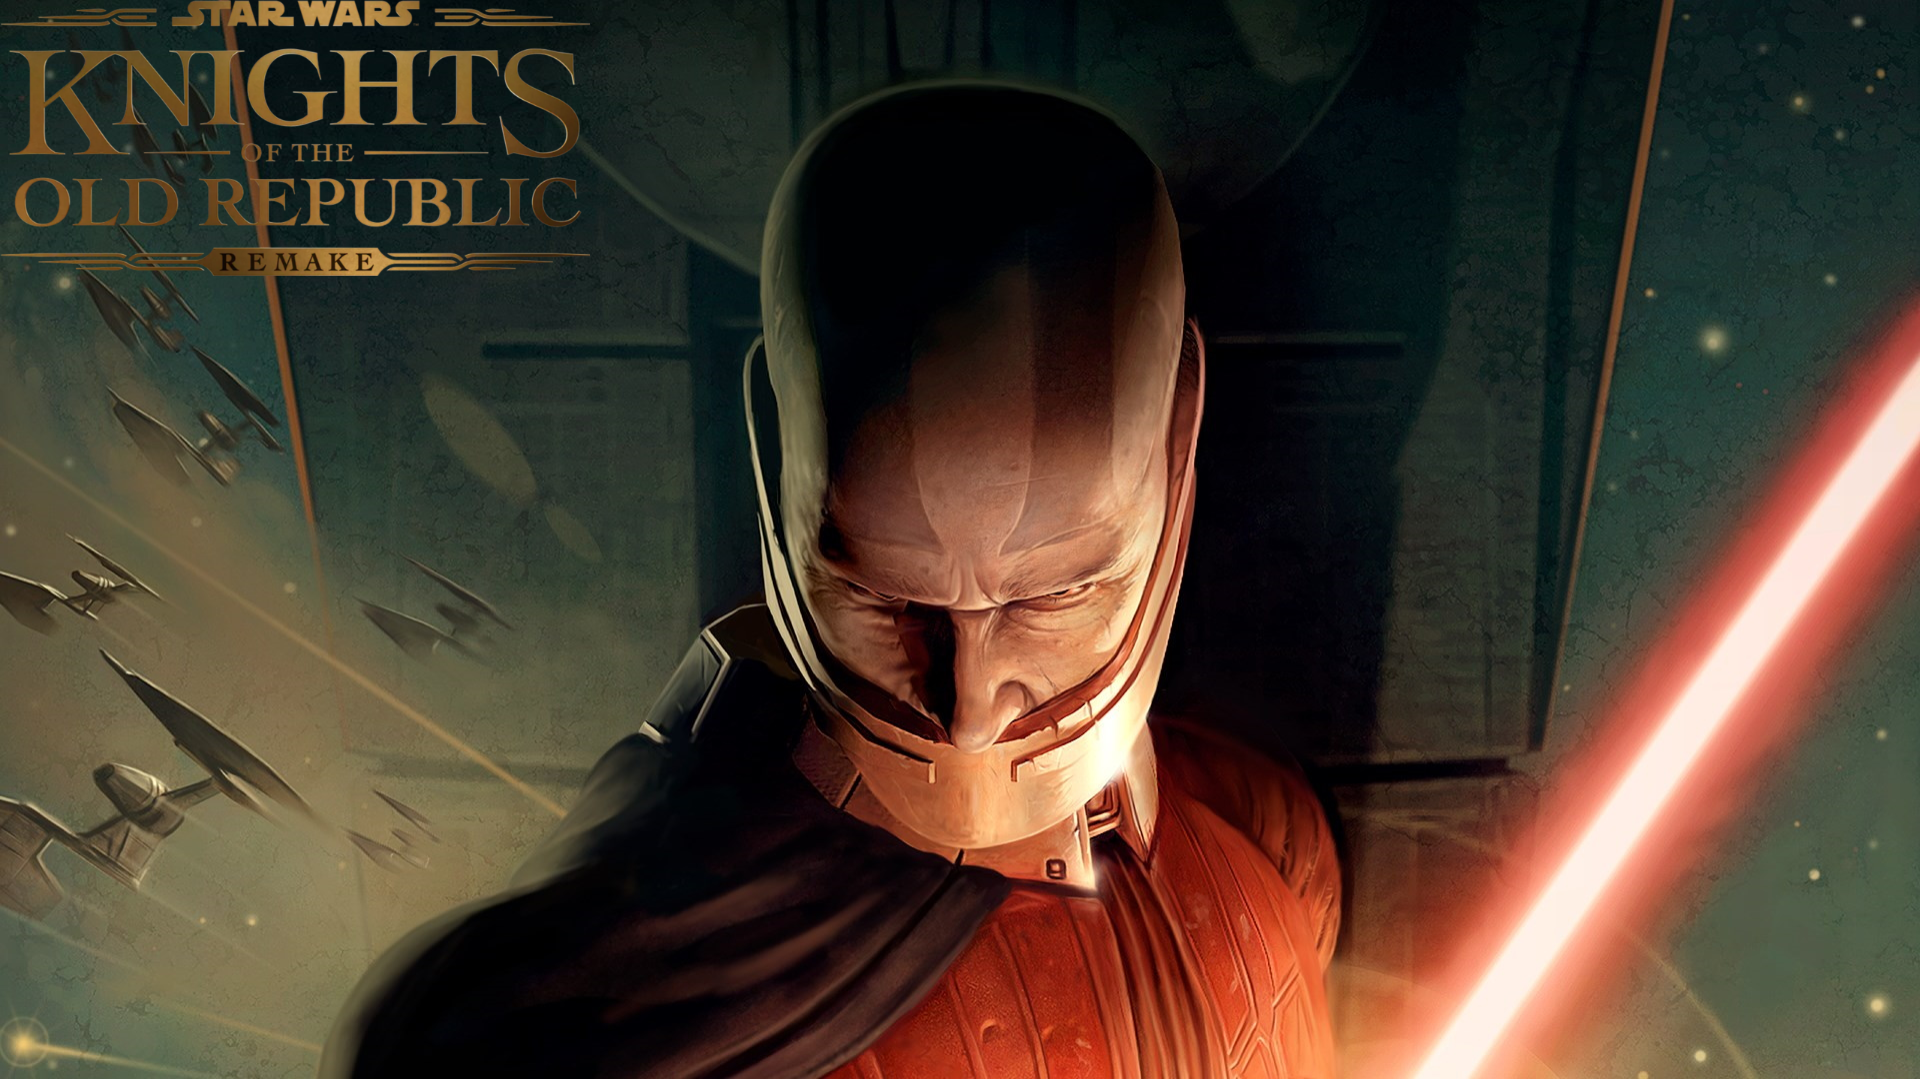 Knights Of The Old Republic Remake plakat